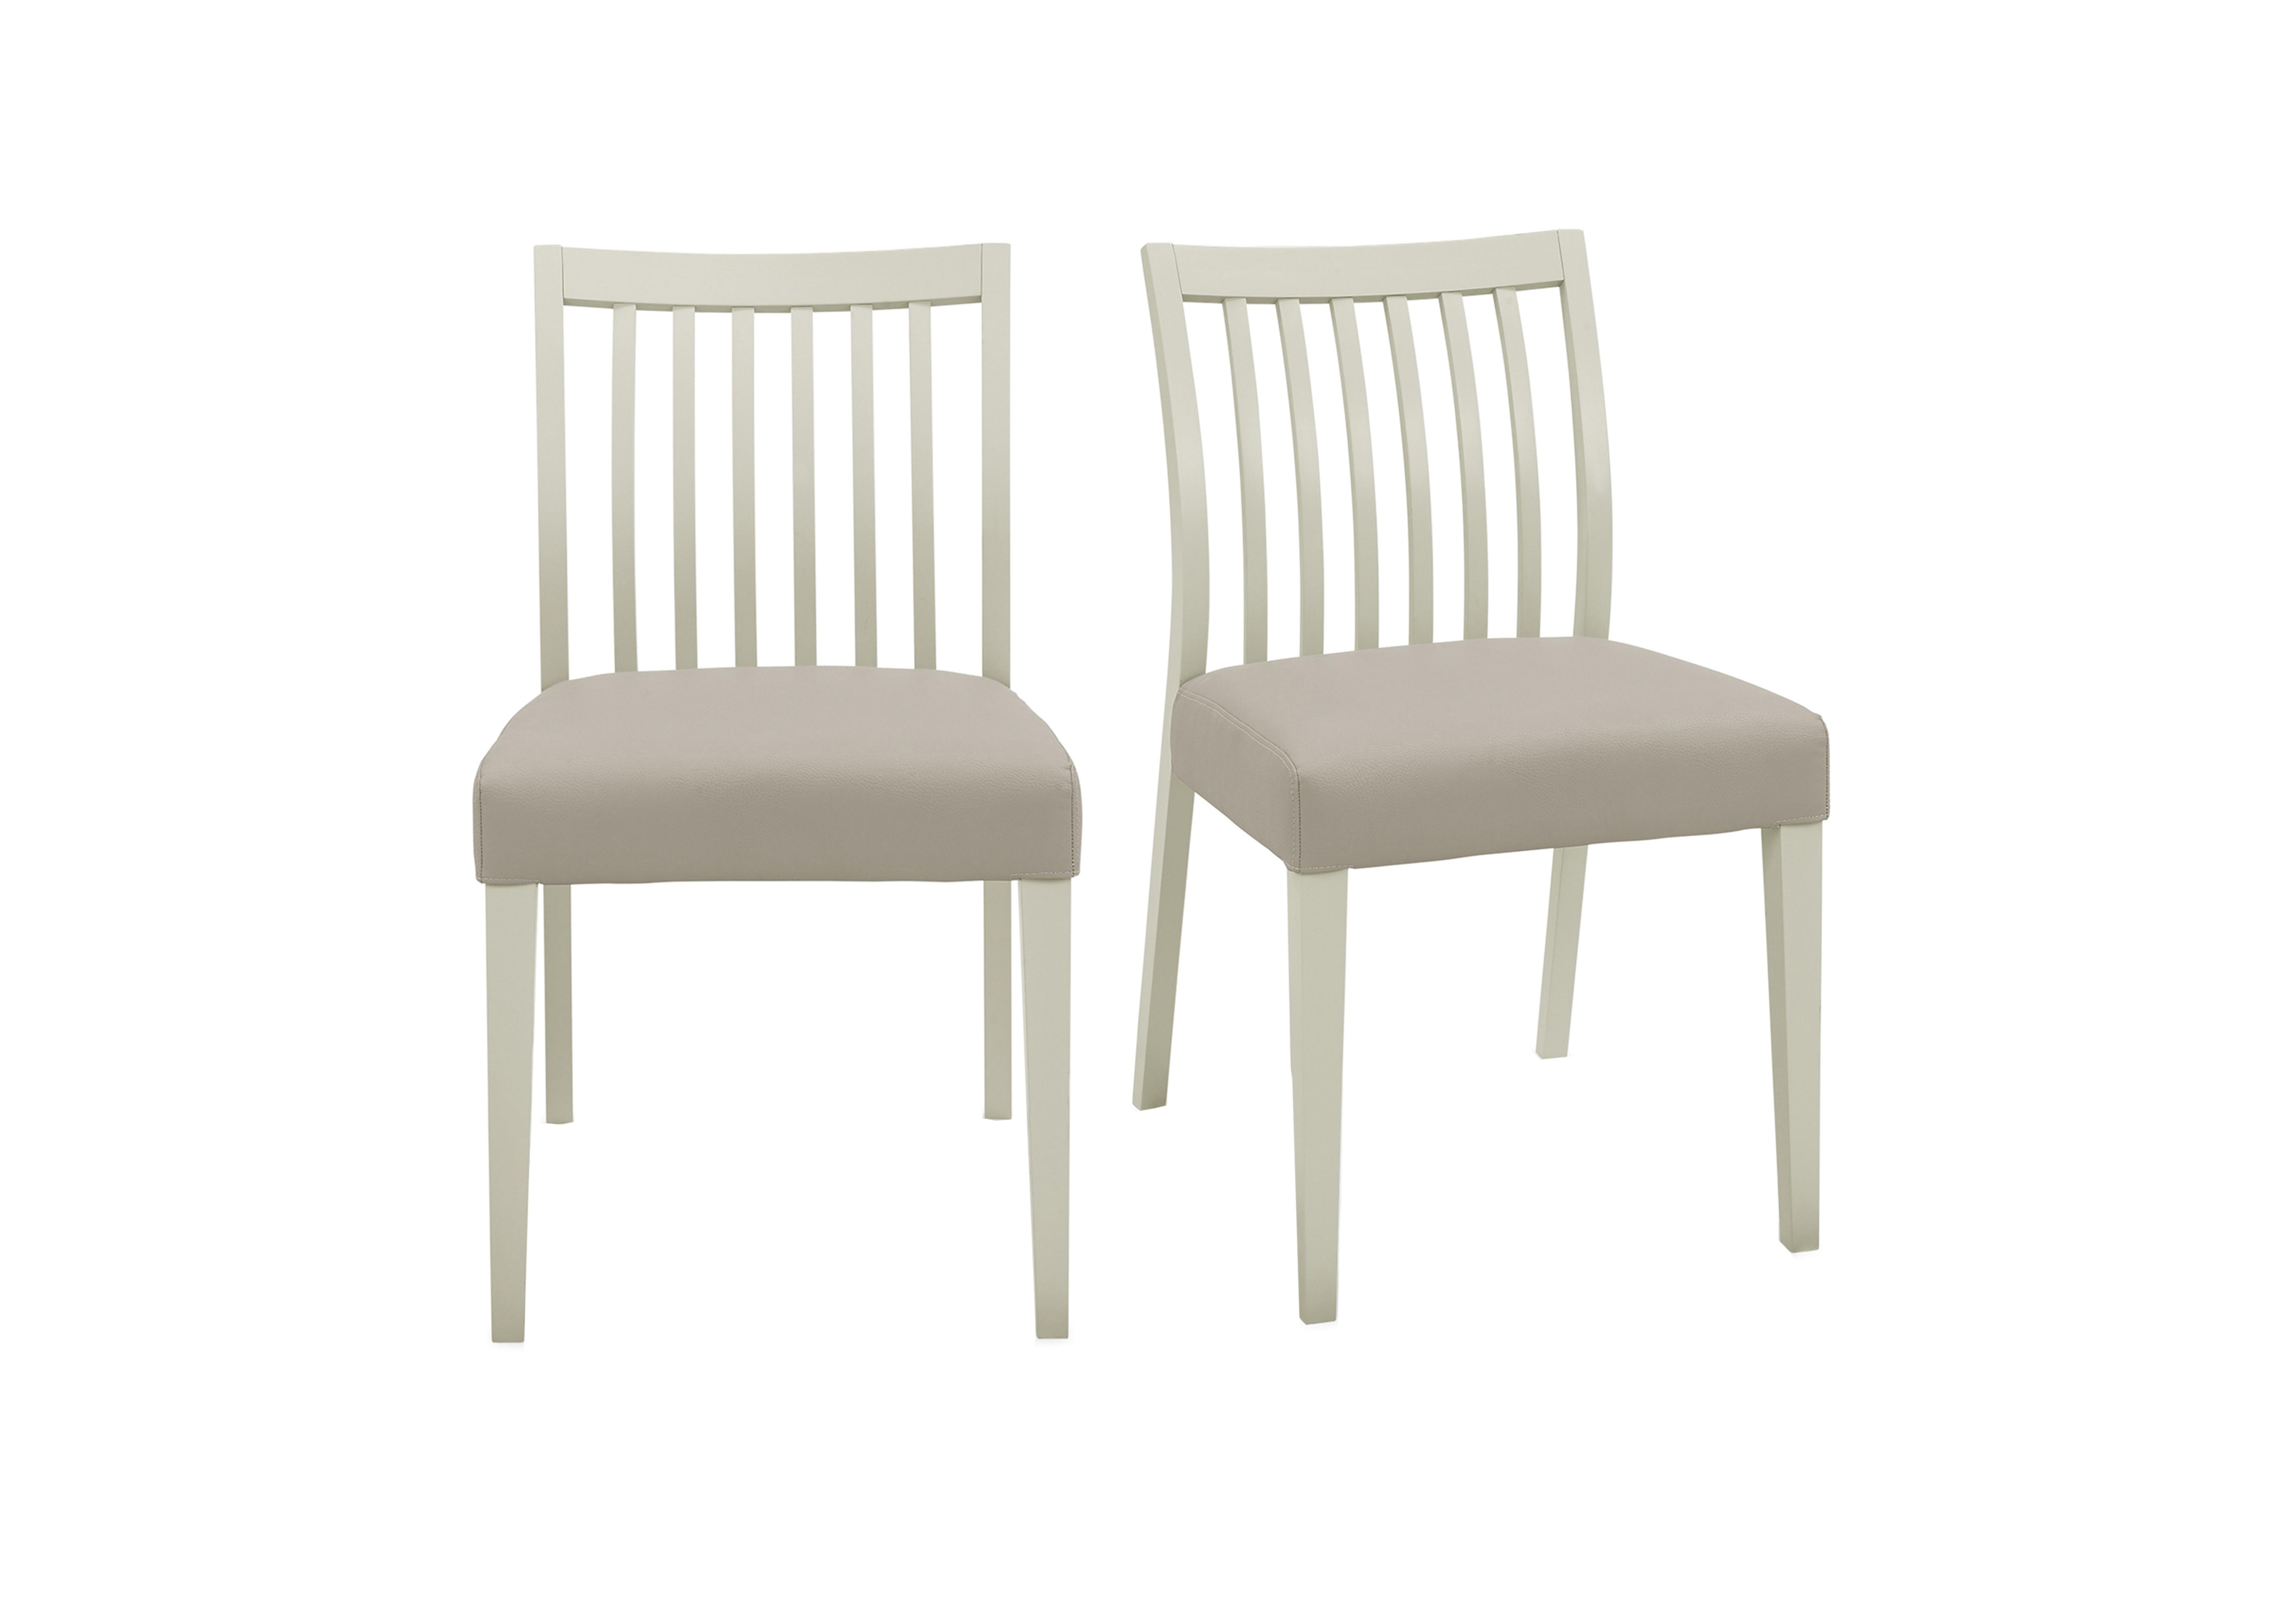 Skye Pair of Low Slatted Chairs in Two Tone/Grey on Furniture Village